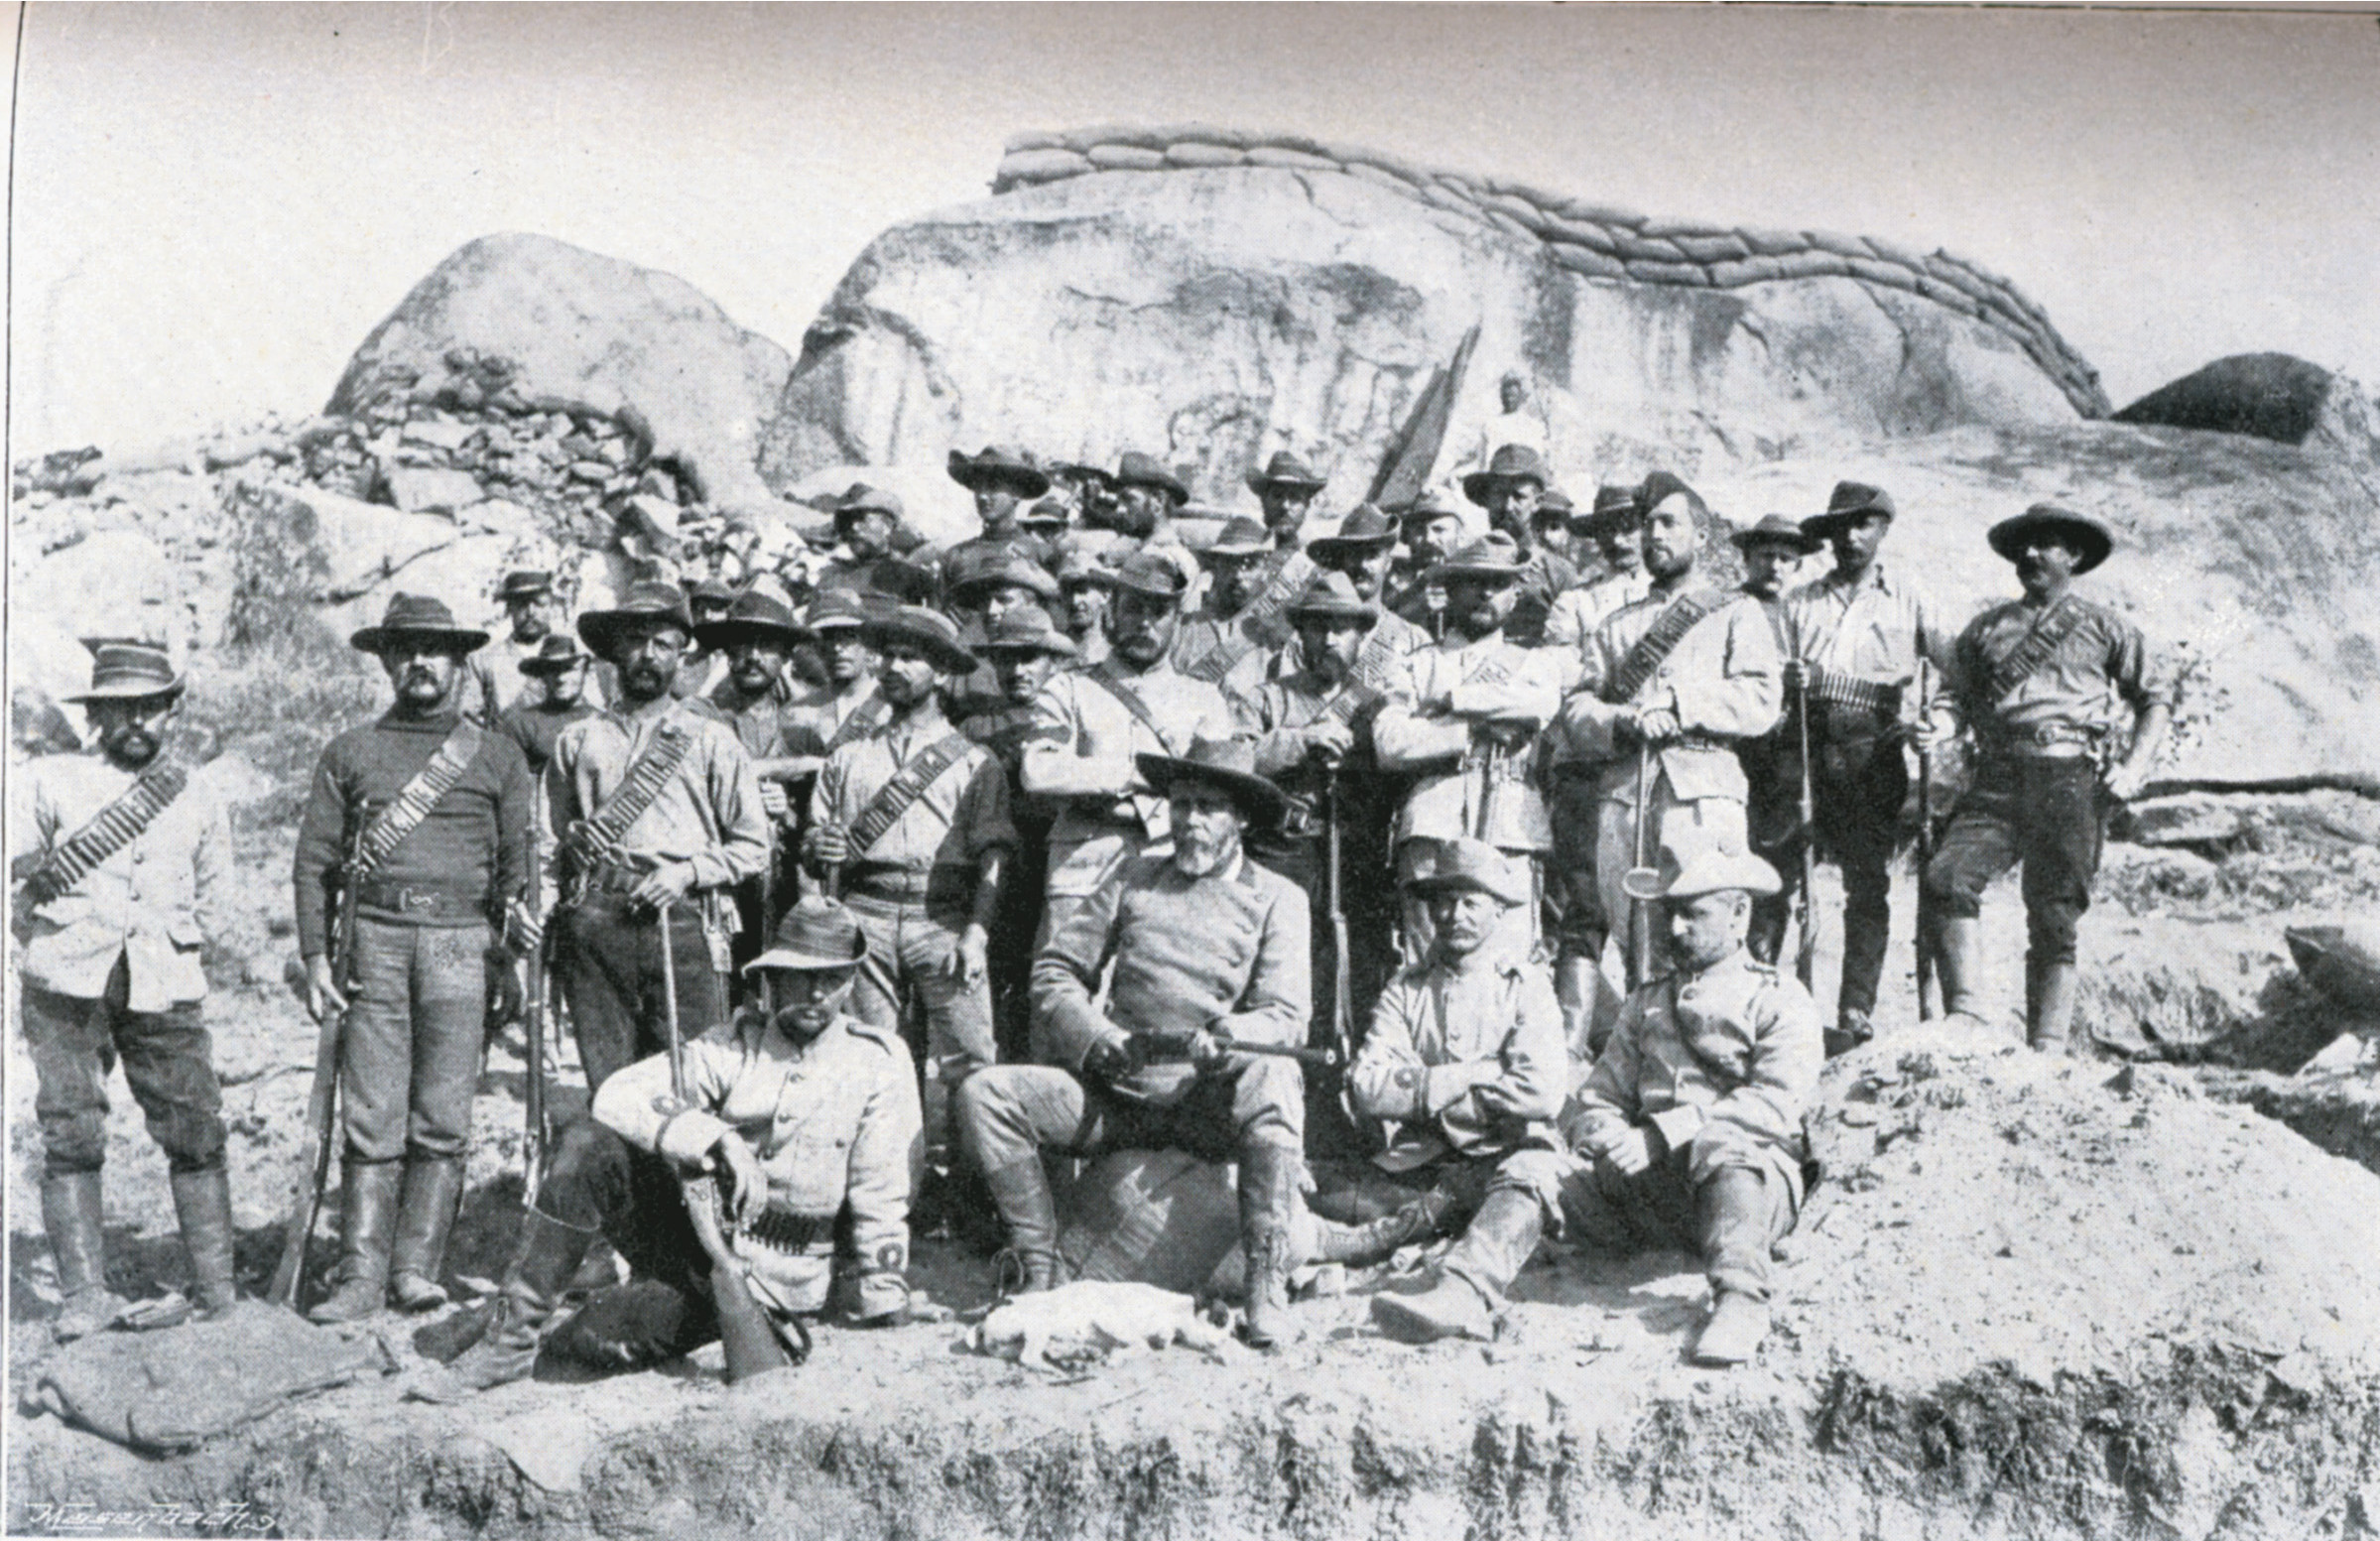 English volunteer militiamen gather at Fort Marquand prior to the ill-starred campaign against the Matabele. 